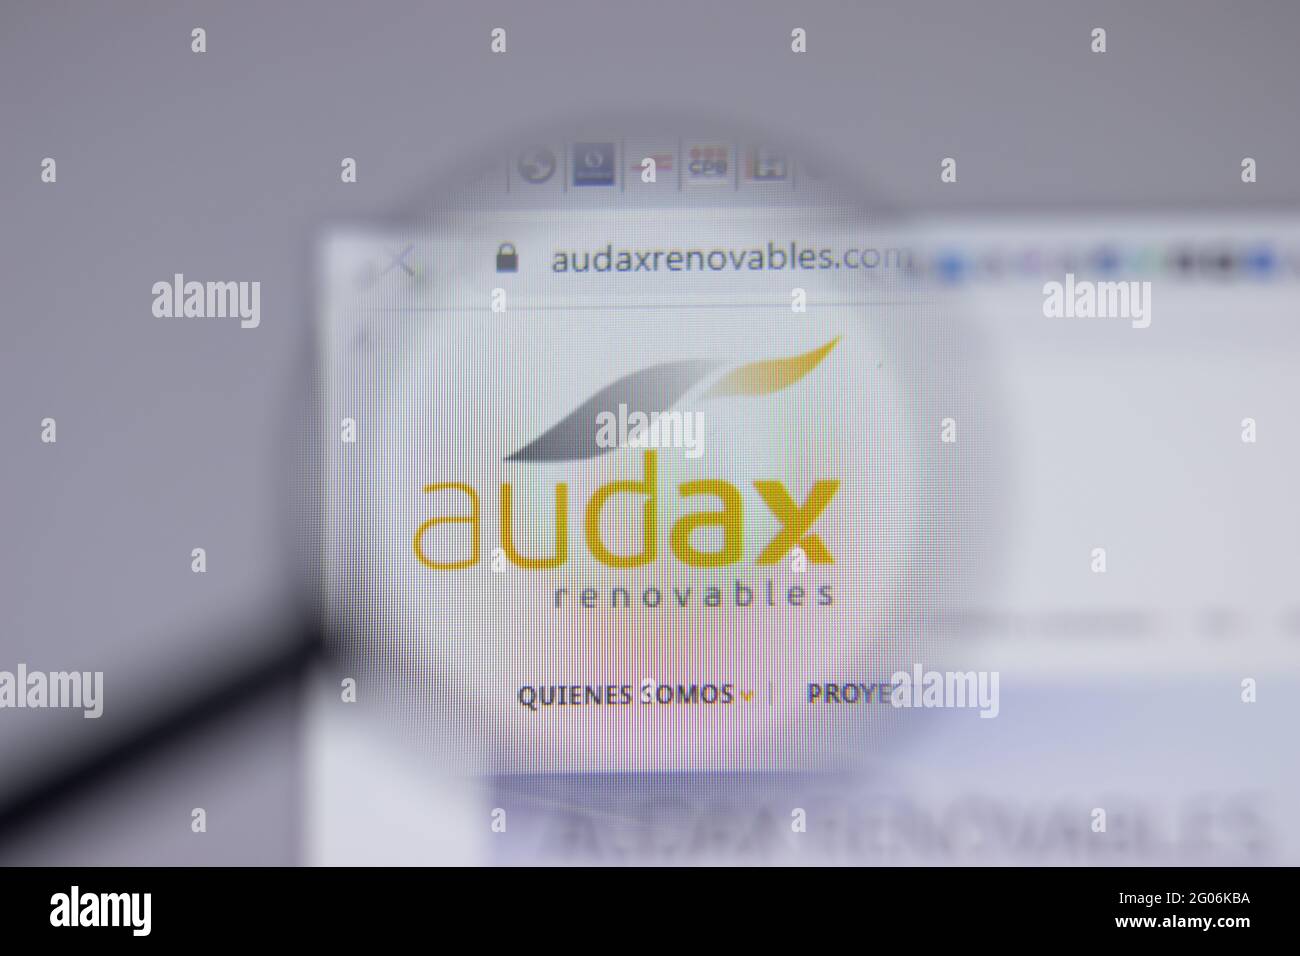 Los Angeles, California, USA - 1 June 2021: Audax Renovables logo or icon on website page, Illustrative Editorial Stock Photo